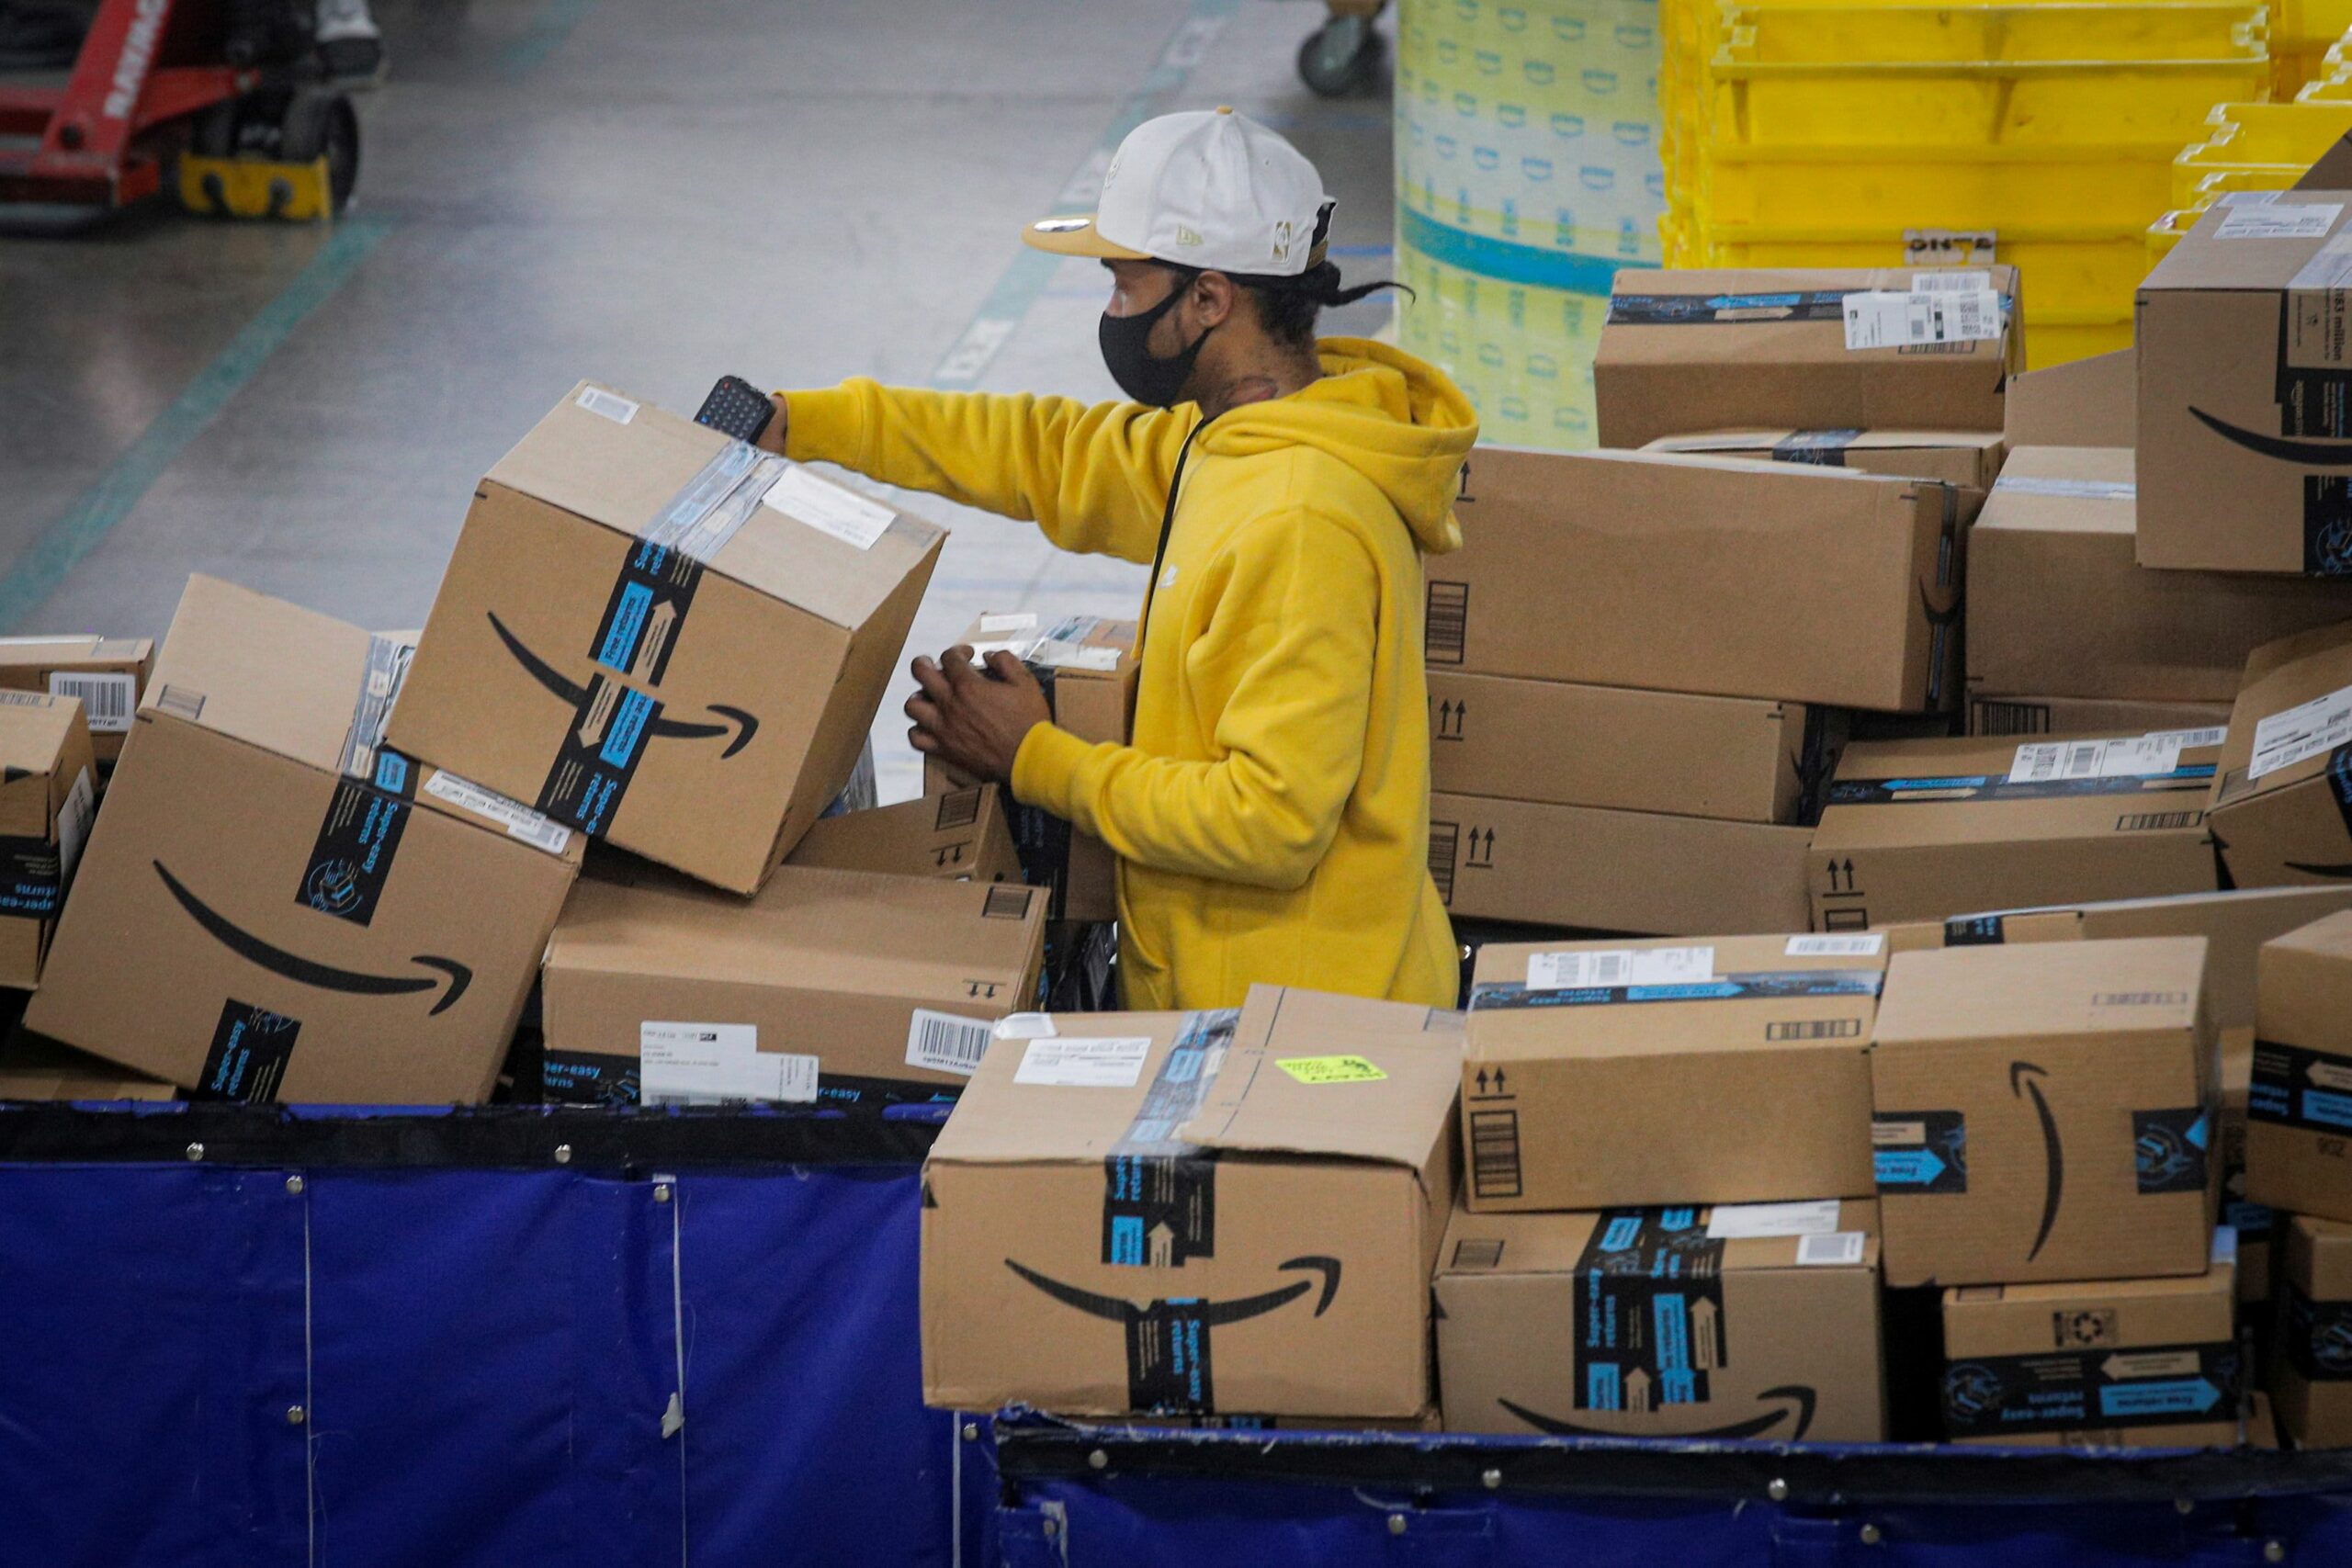 Amazon dropped Covid safety protocols in warehouses